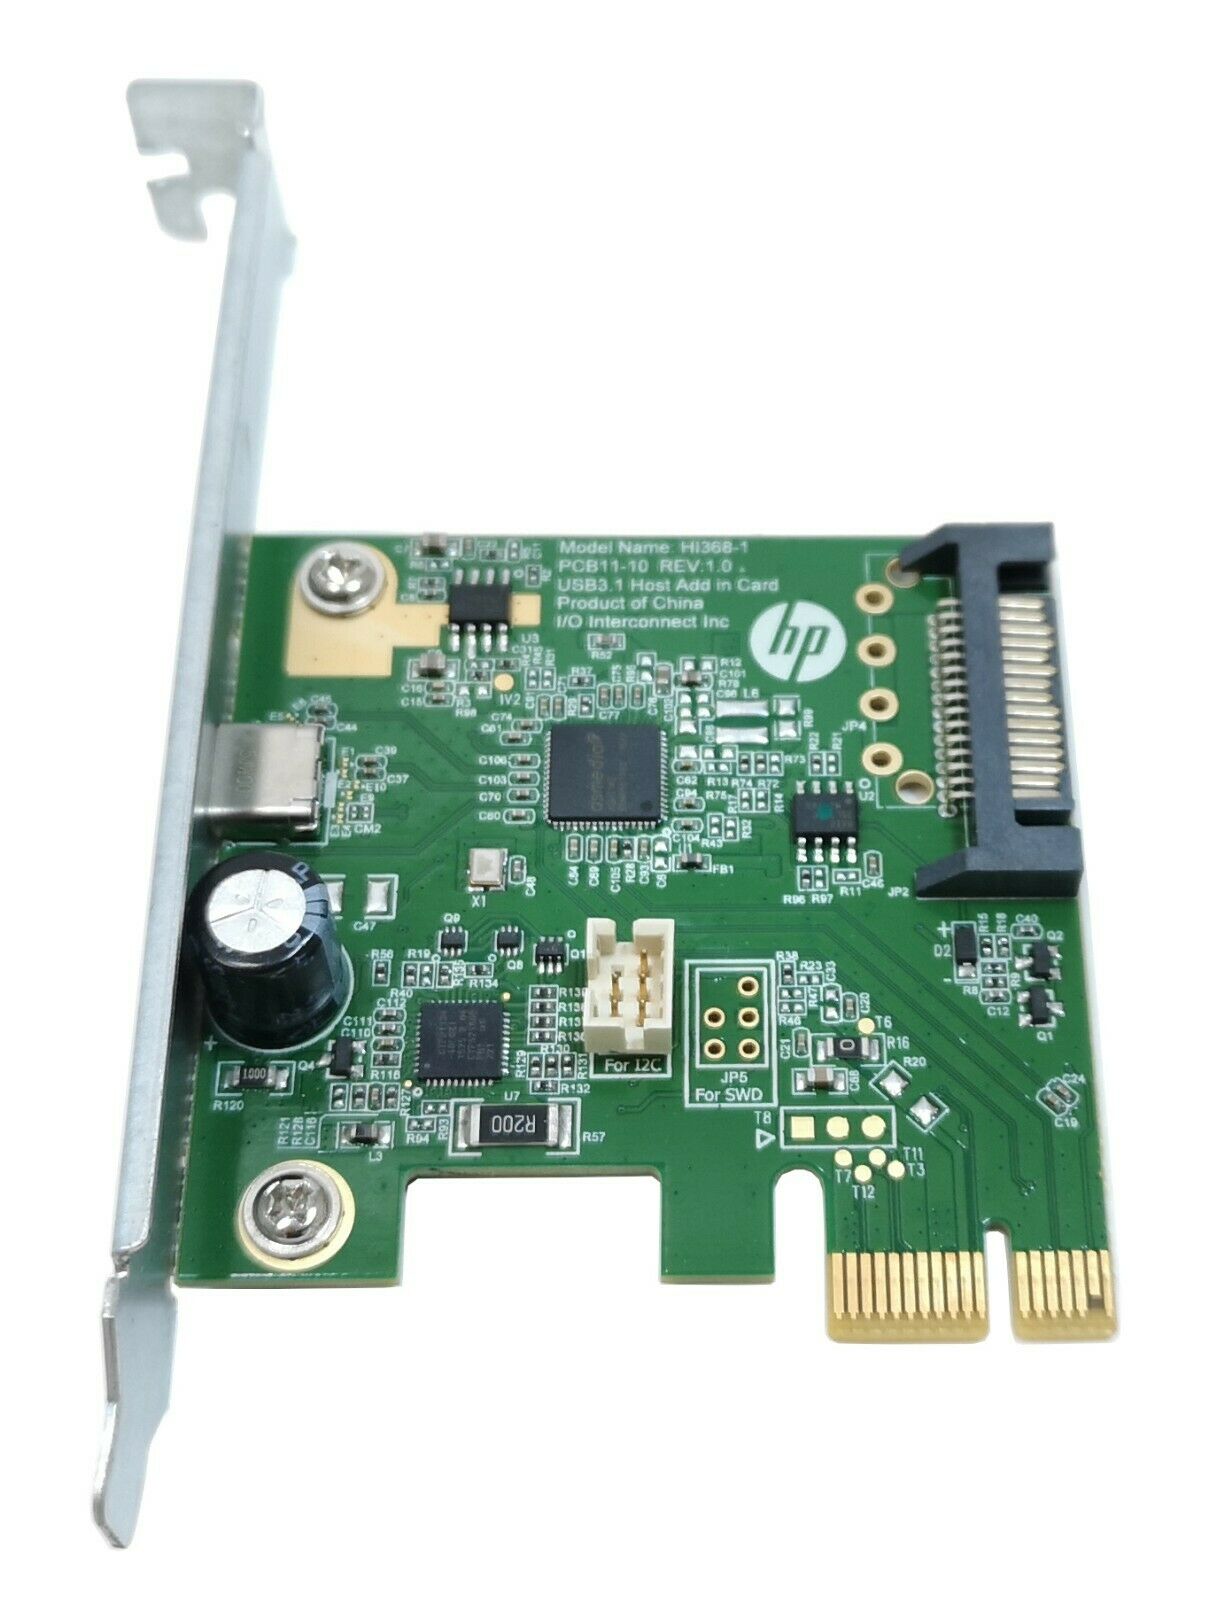 USB-C 3.1 PCI-E Data Link Card Adapter For Oculus VR Headsets 10Gbps USB Type C Port - image 4 of 4